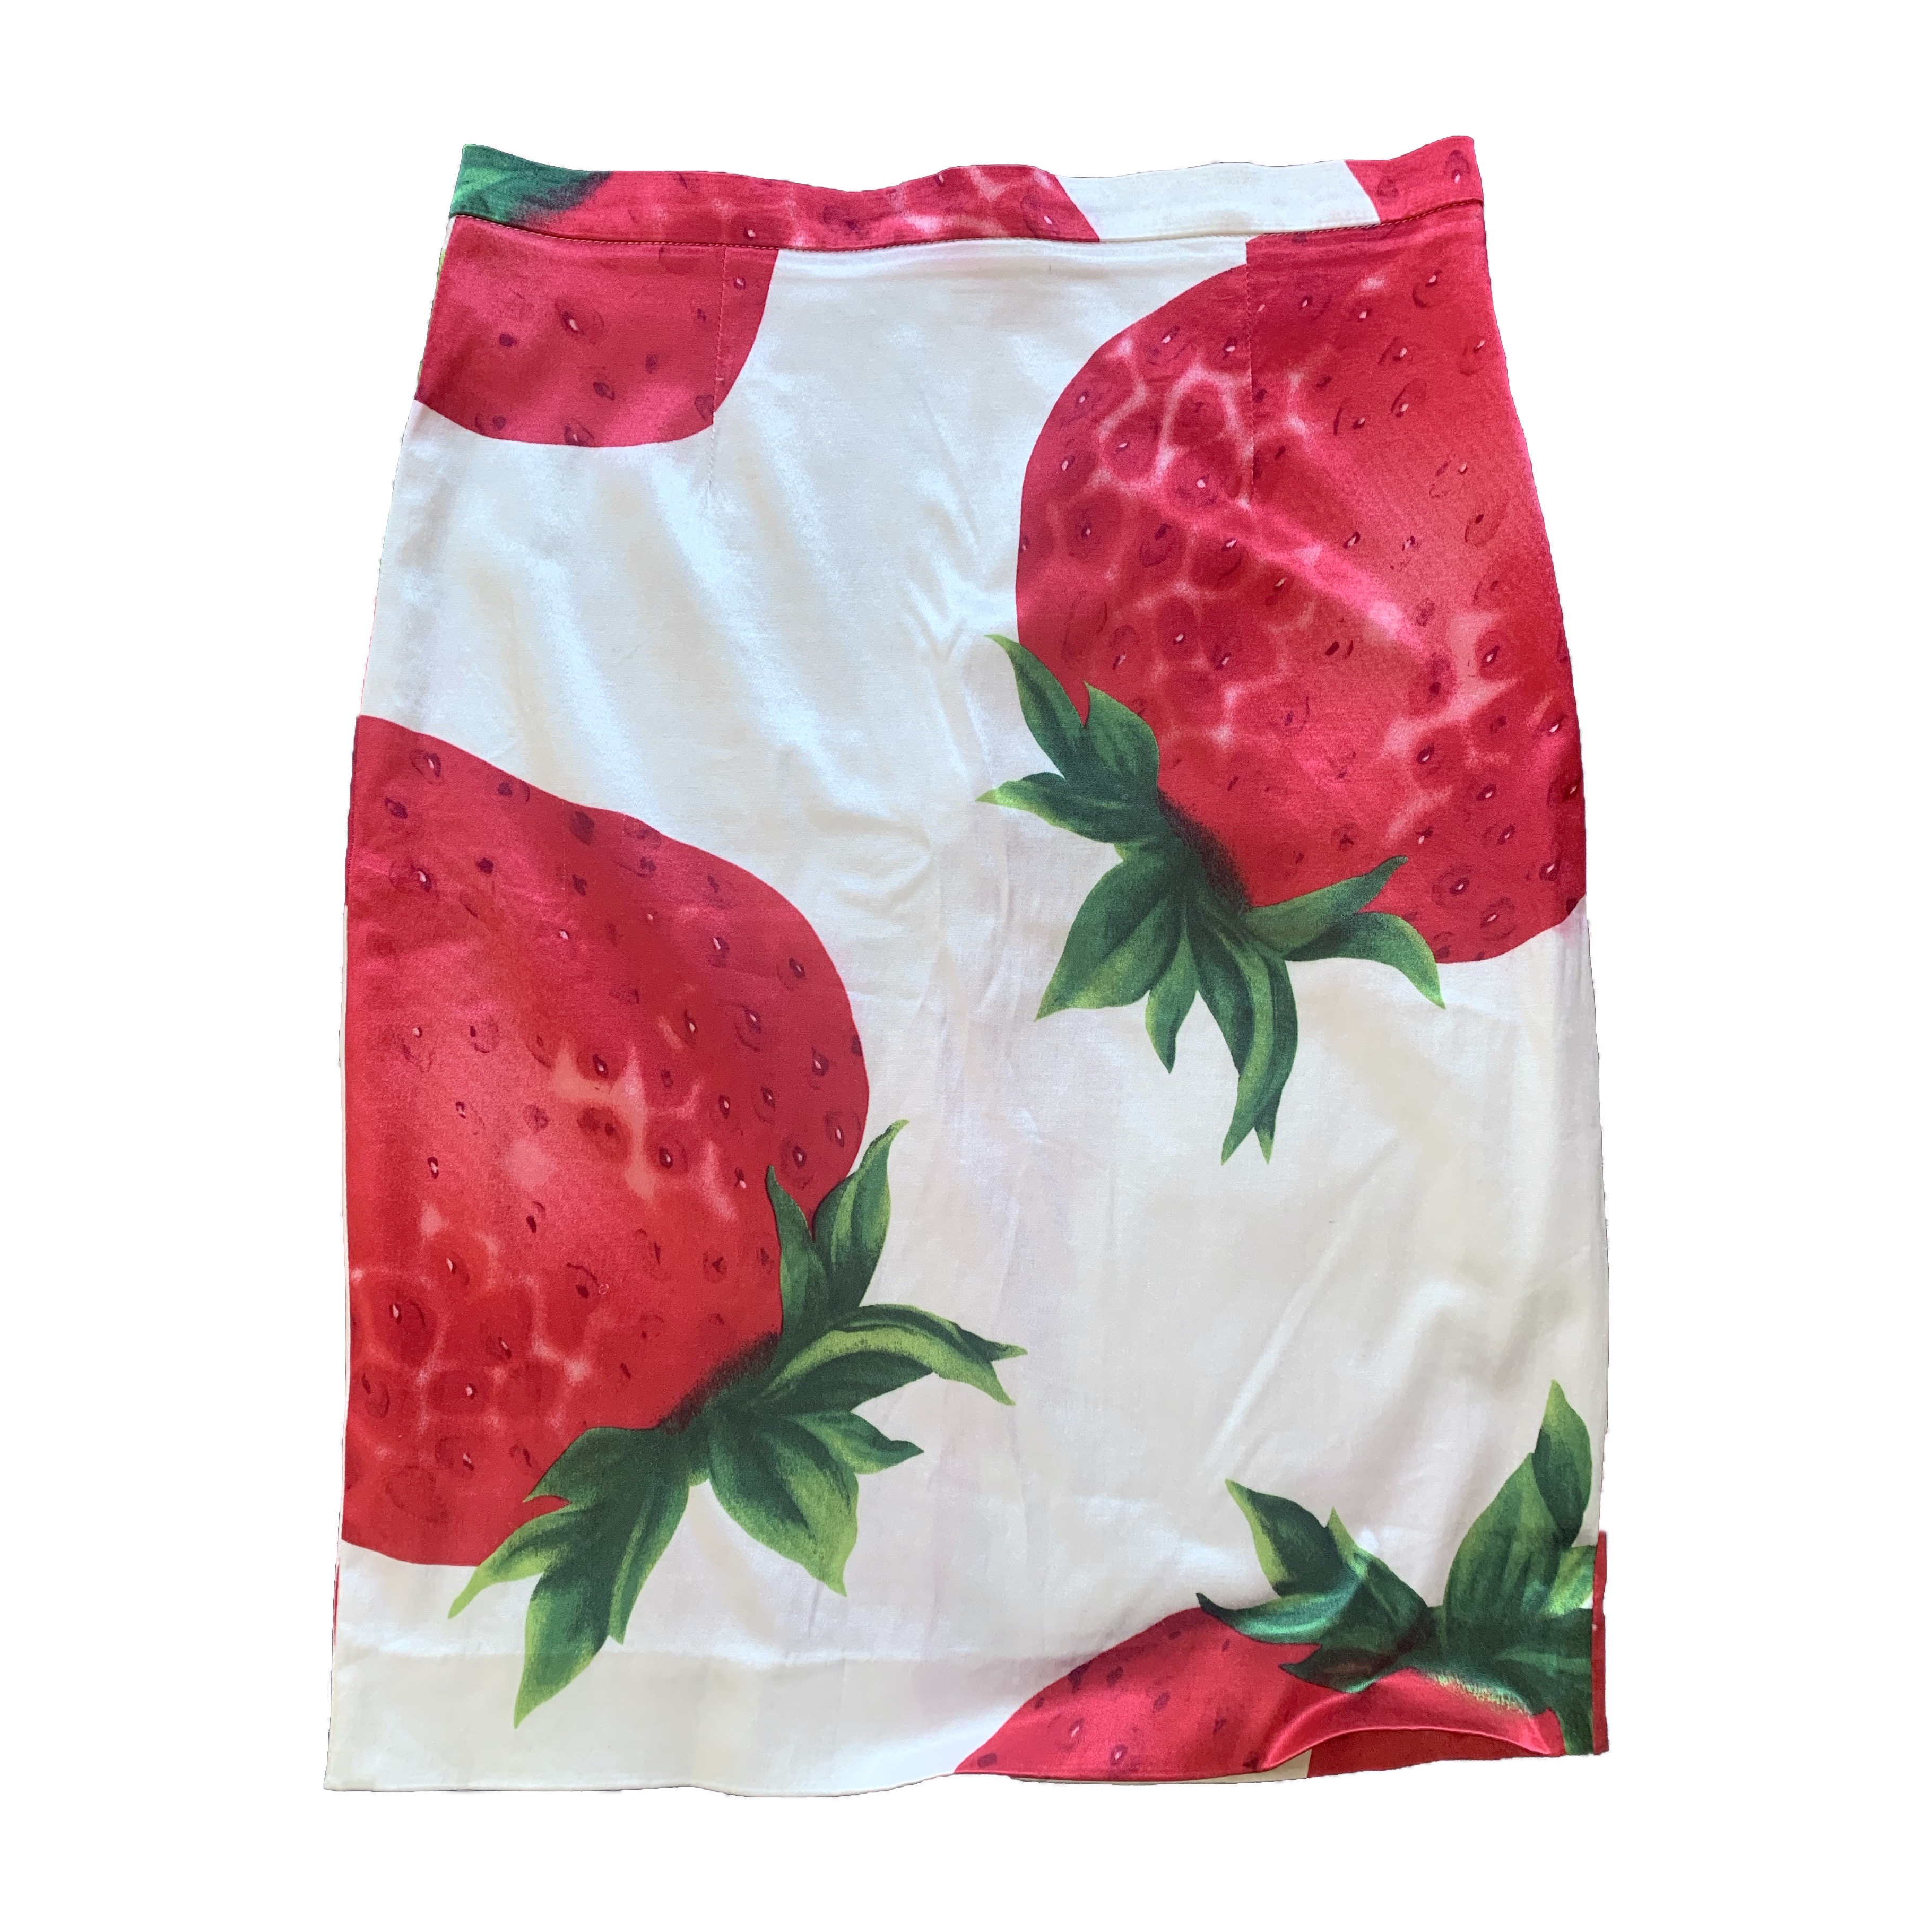 a white and red skirt with strawberries on it